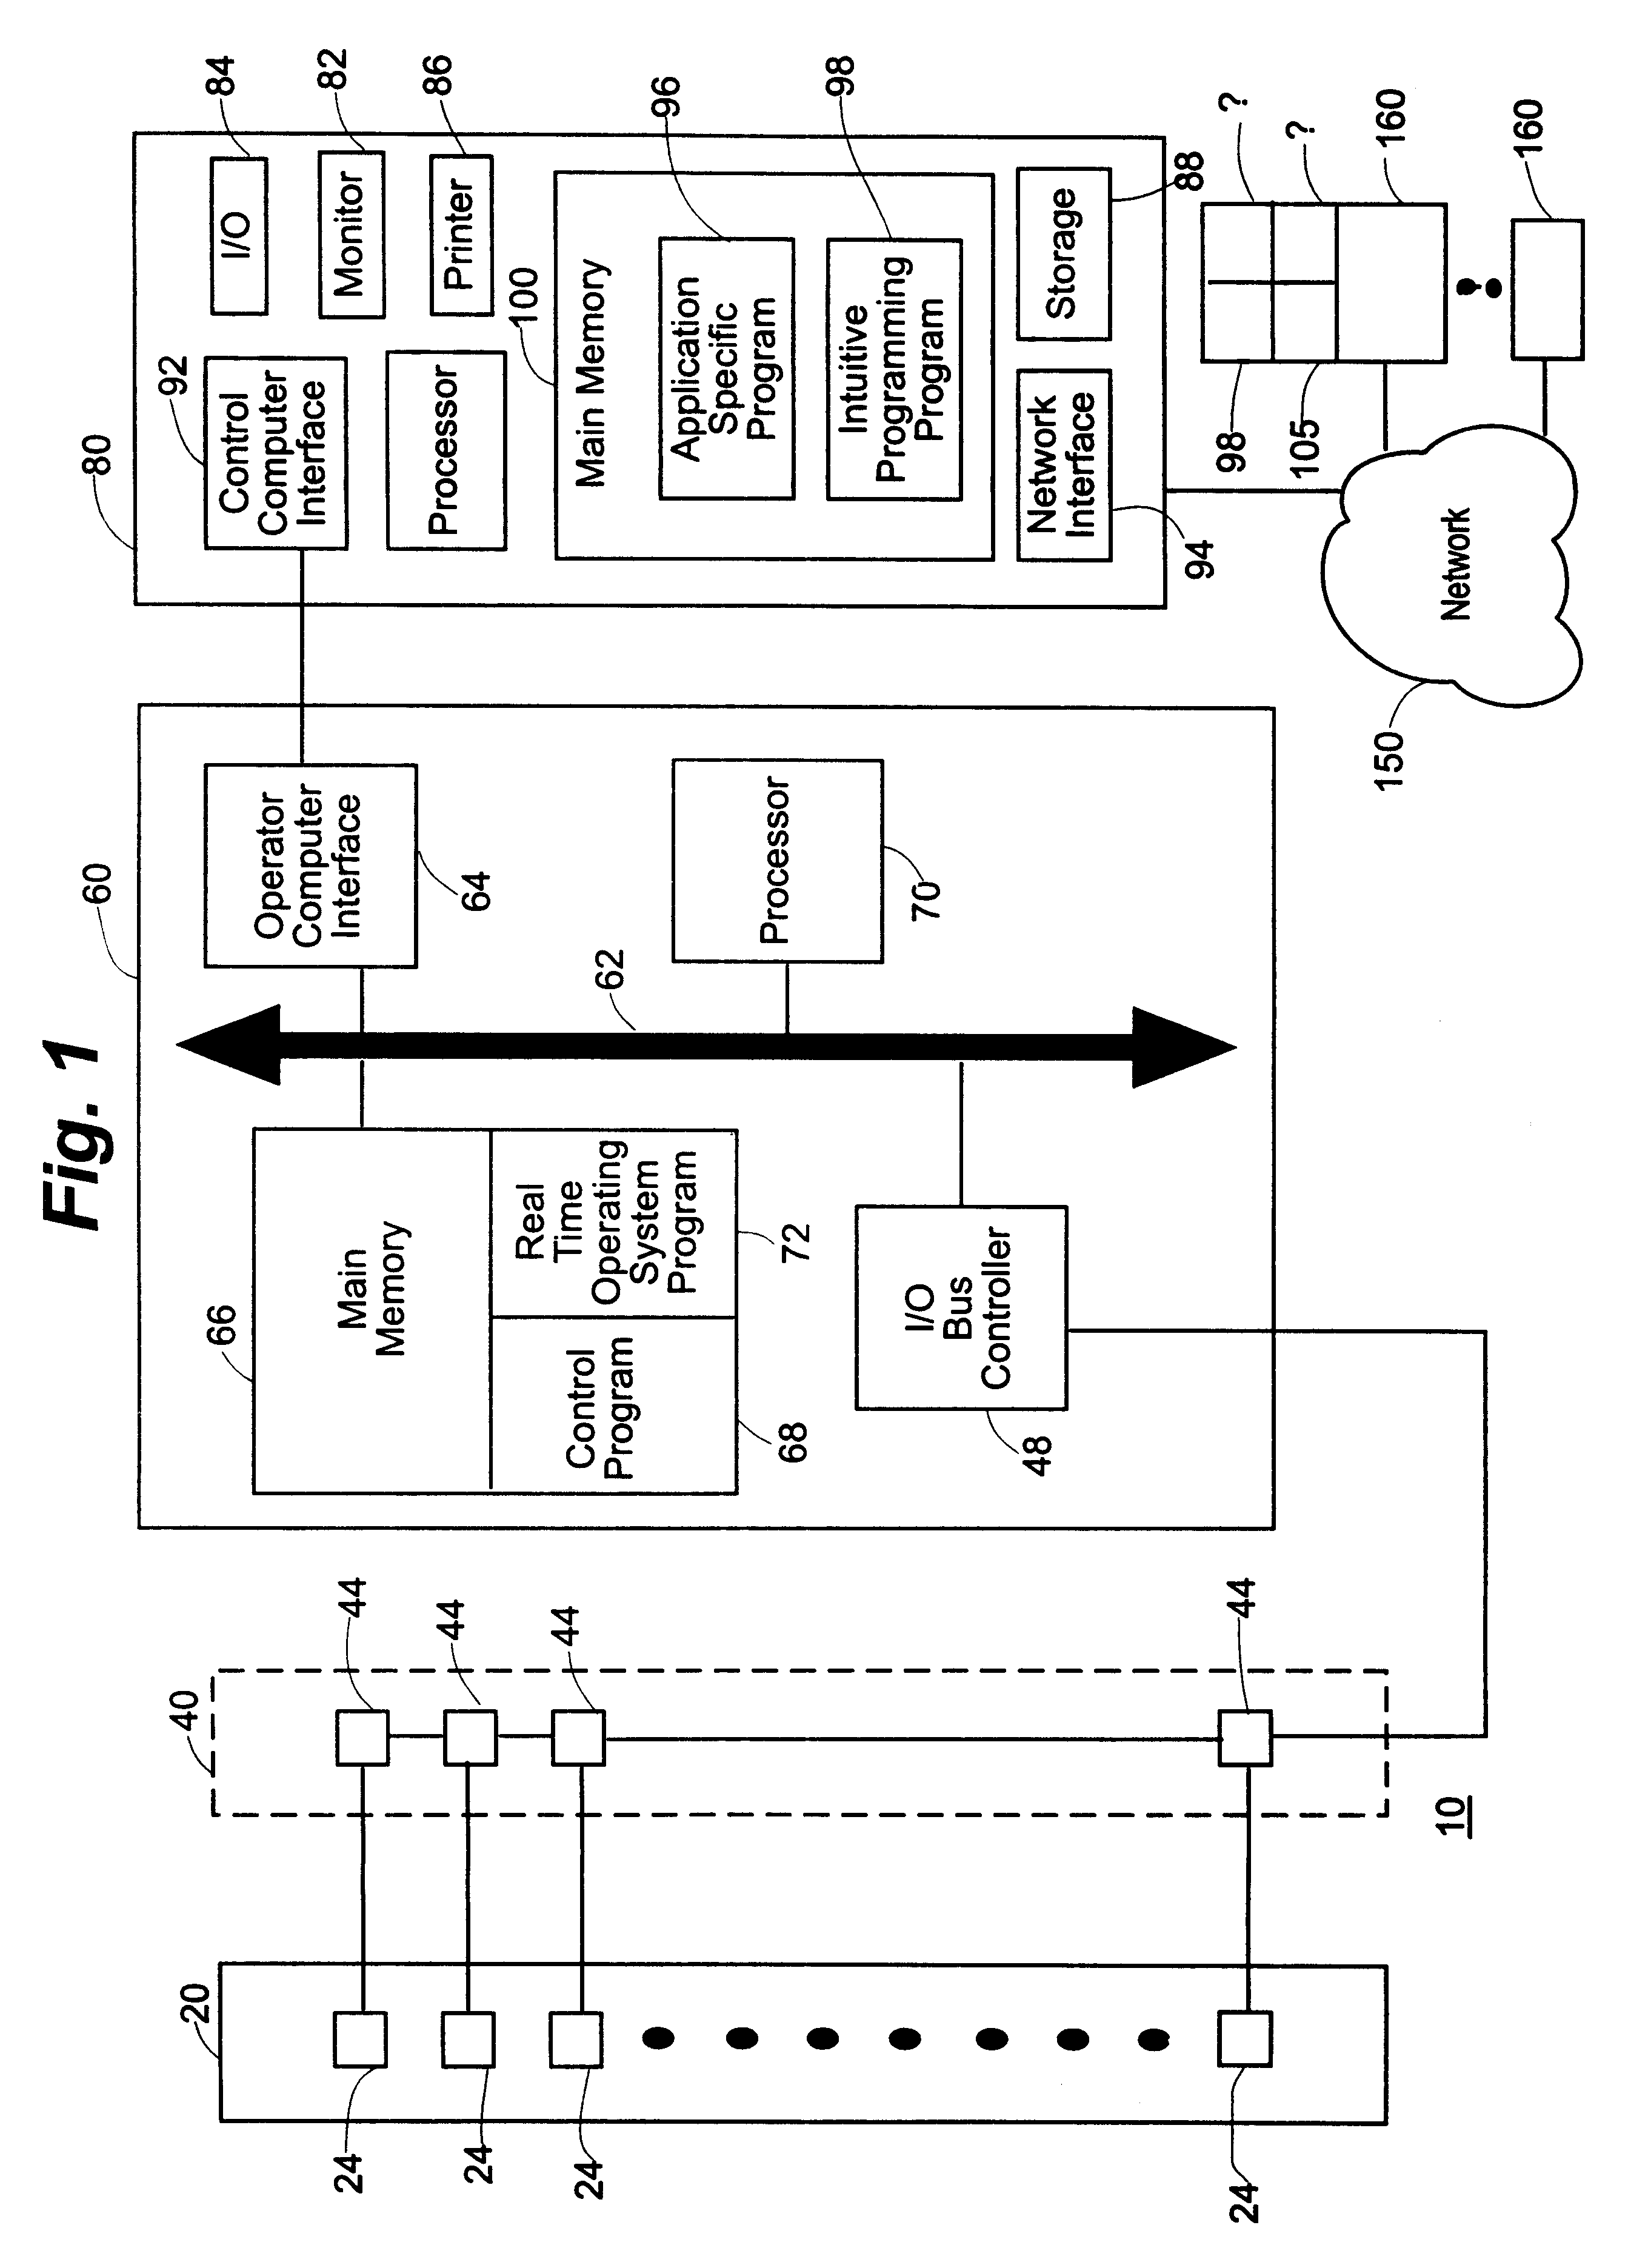 Processor-based process control system with intuitive programming capabilities